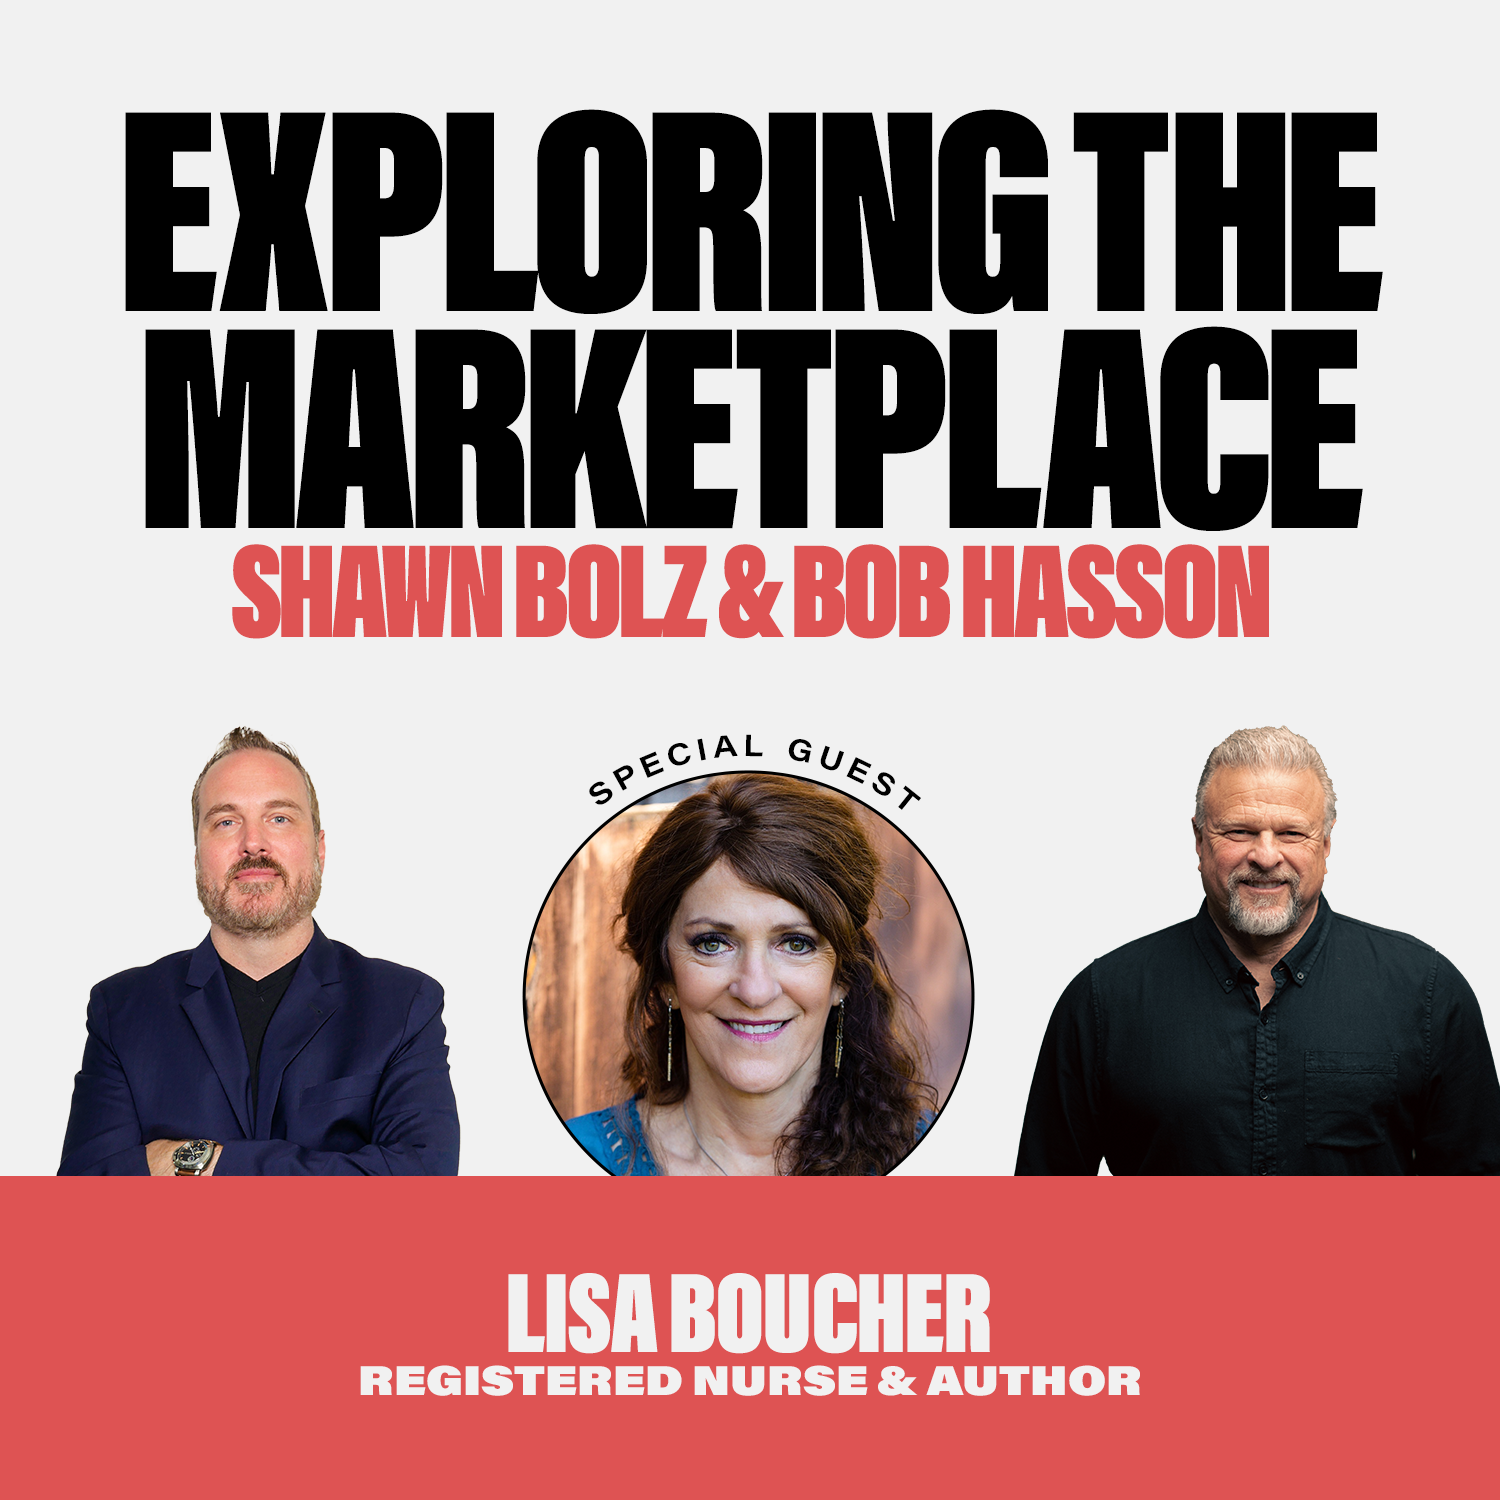 Finding Freedom from Alcohol Addiction with Lisa Boucher (S:3 - Ep 19)